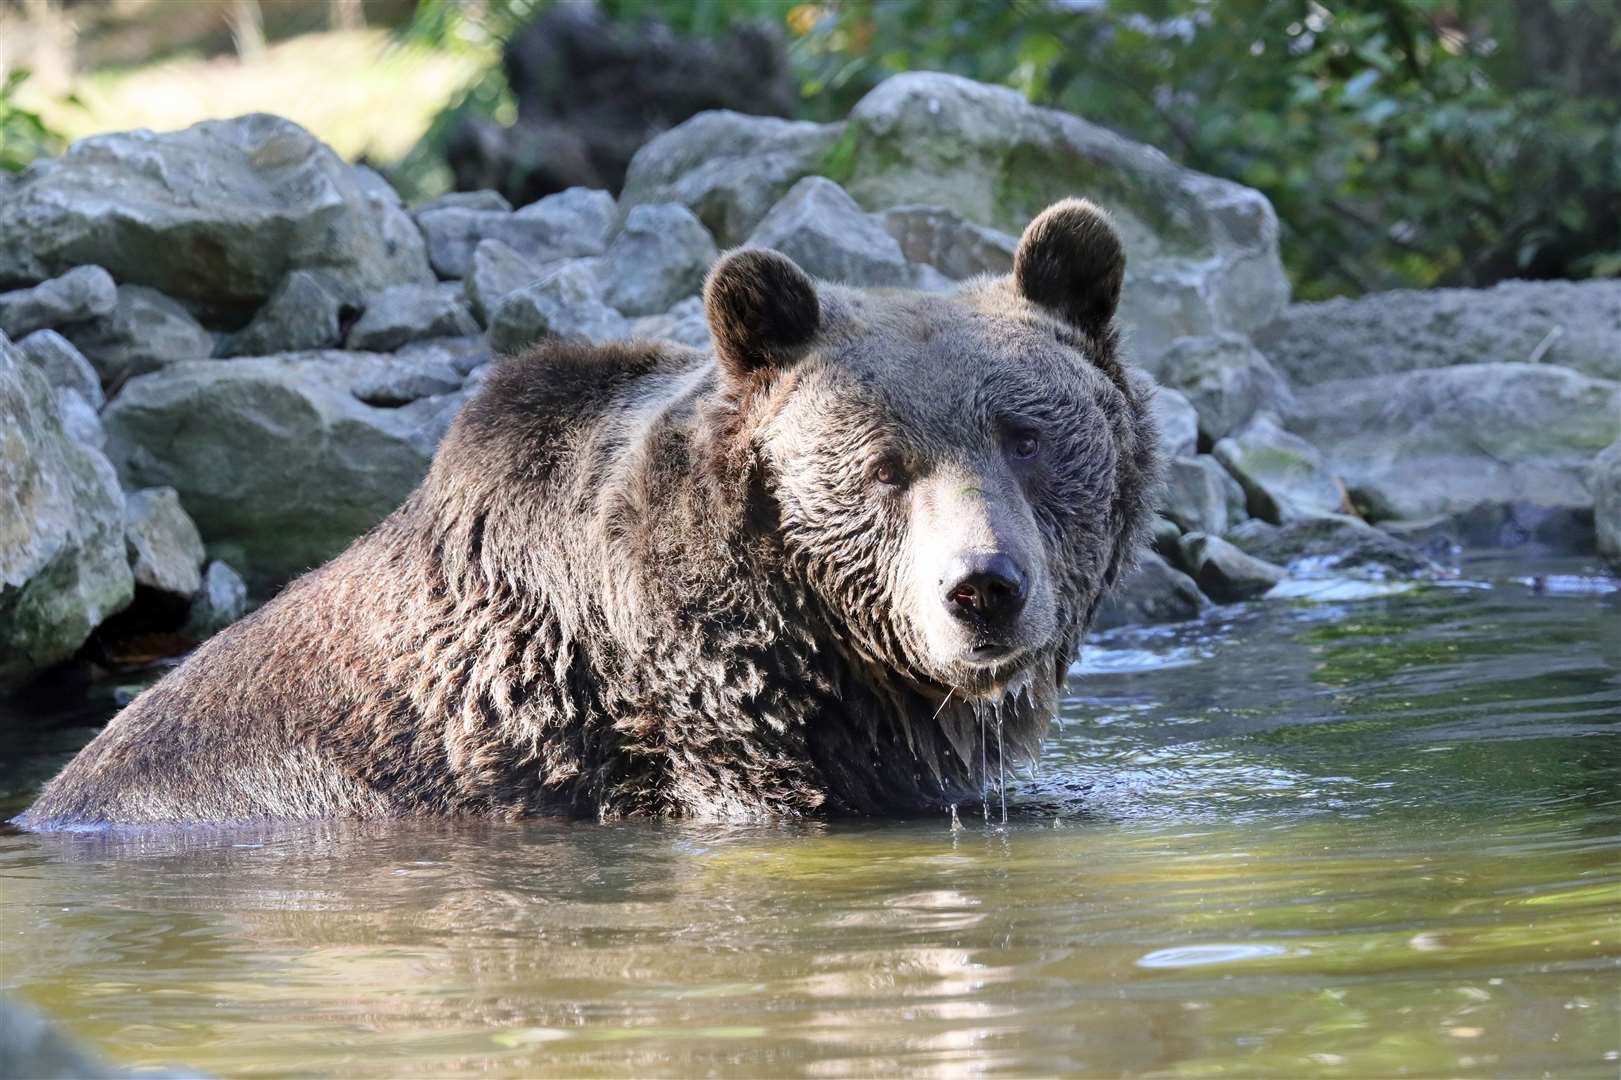 One of the bears takes a dip at Wildwood